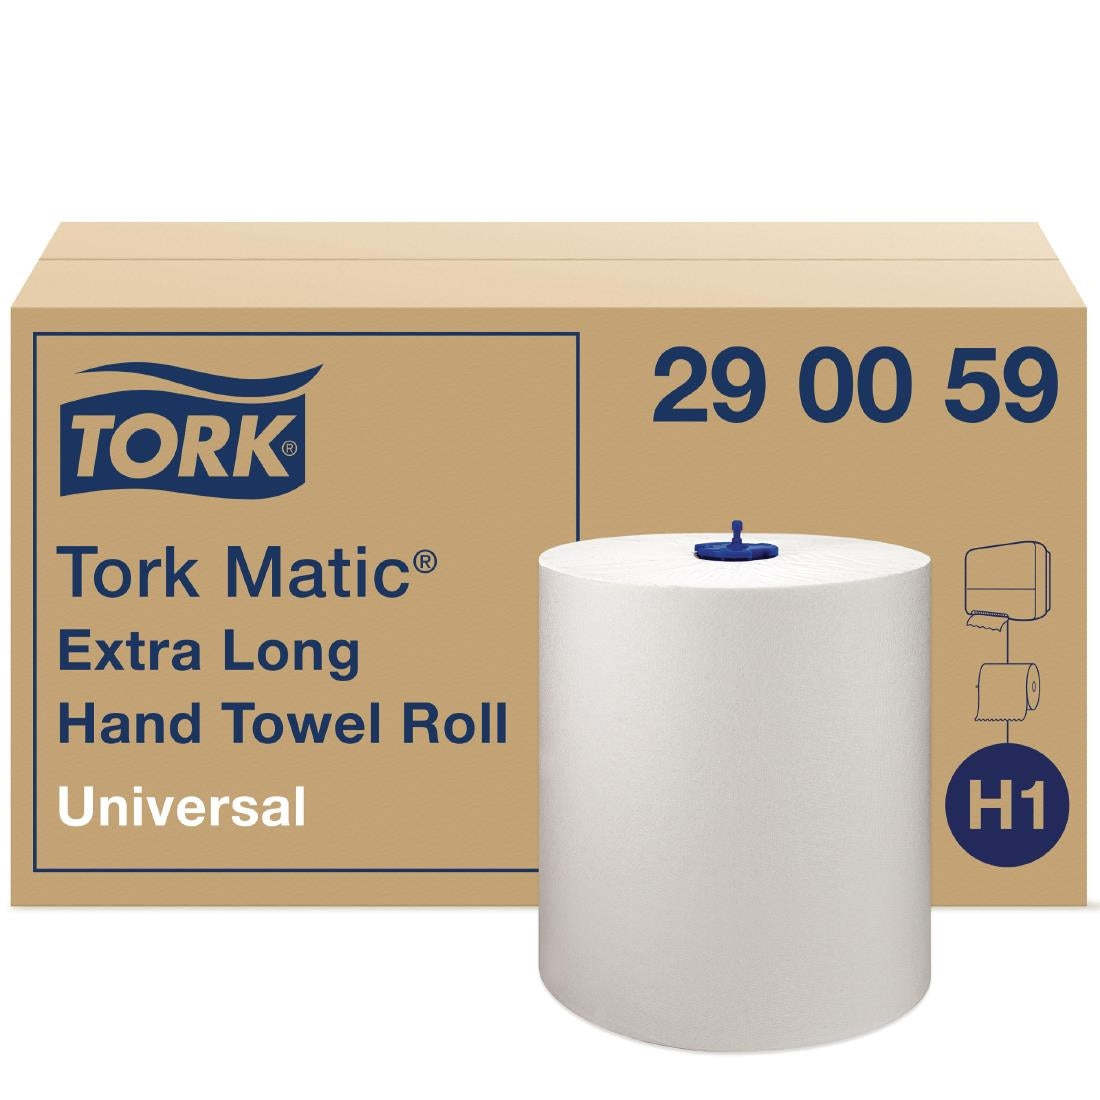 Tork Matic Extra-Long Hand Towel Rolls 1-Ply 280m (Pack of 6)